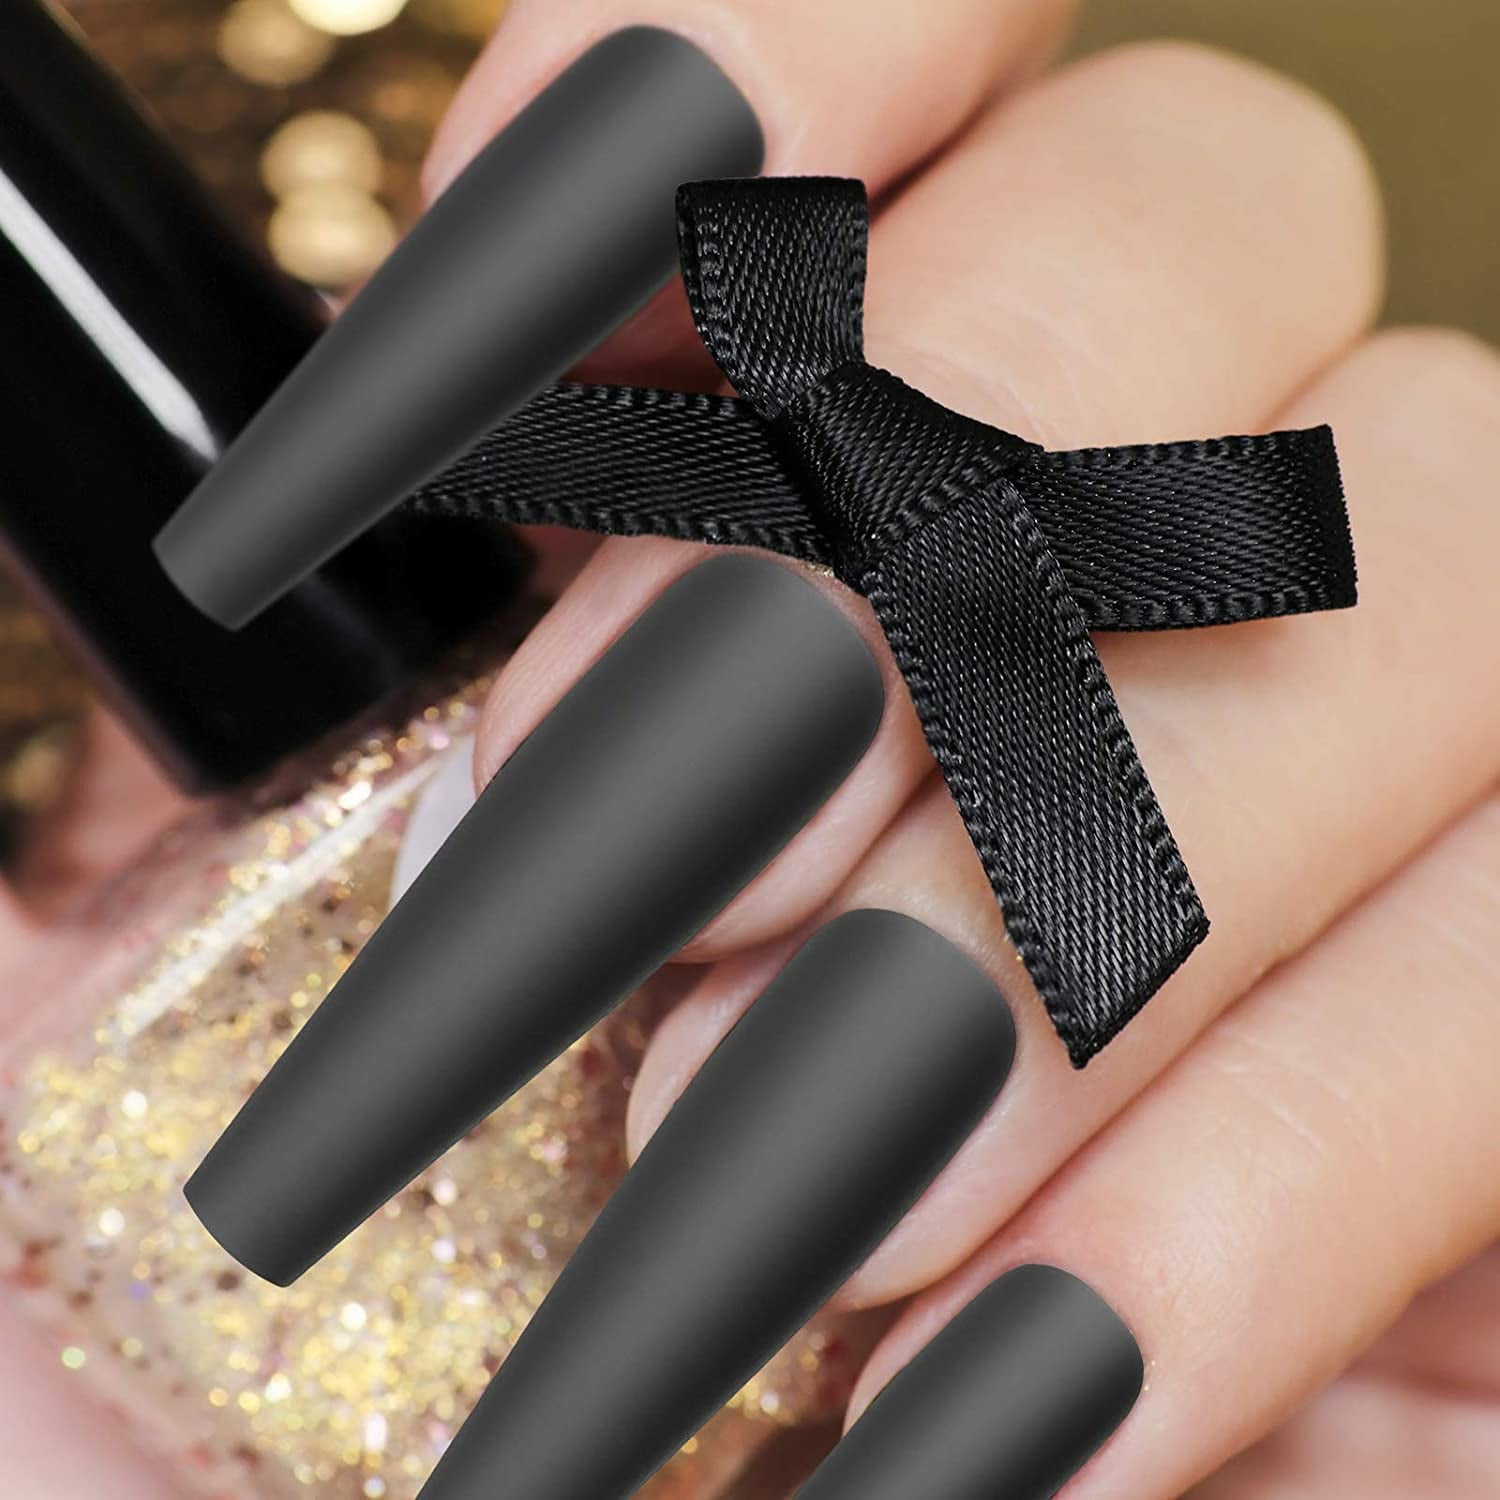 Medium Length 3D Rhinestone Coffin False Nails 1 In Black, Nude, And Pink  Matte Finish Perfect For Acrylic Art And Makeup From Sophine01, $7.49